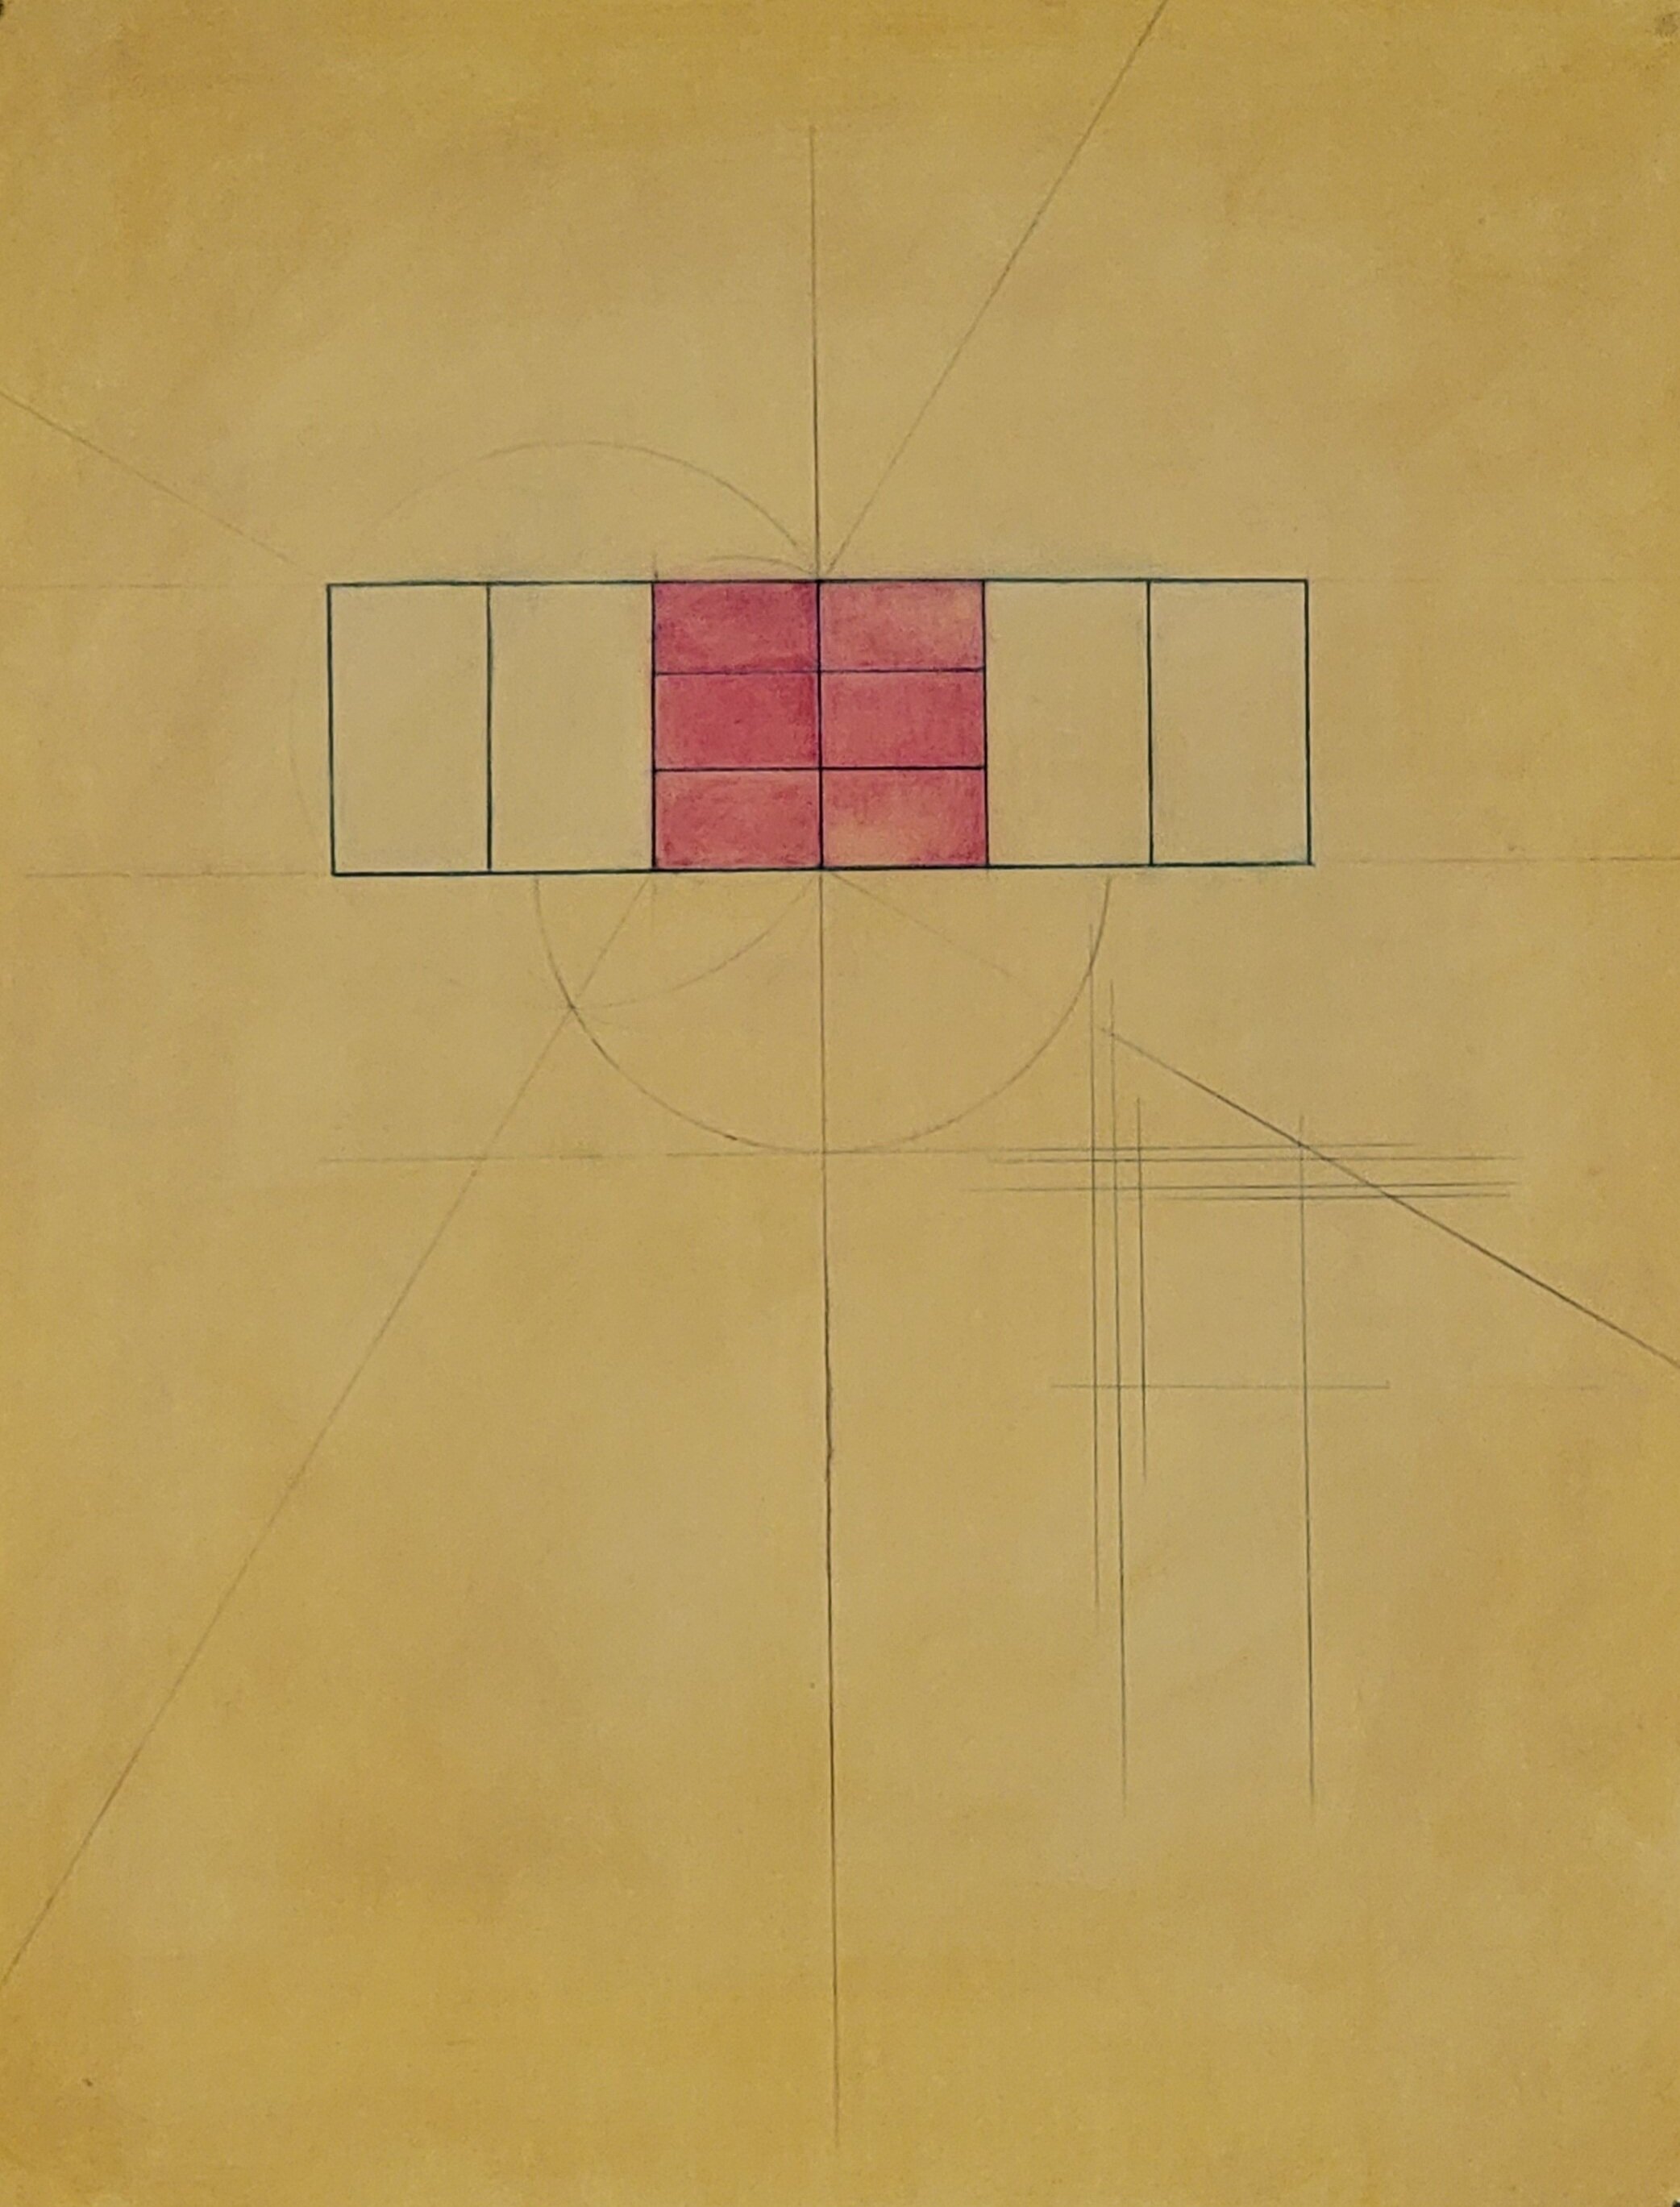 Barton_Golden ratio with pink square 2023 oil on paper with color pencil 30x24 20230610_151922 (1).jpg